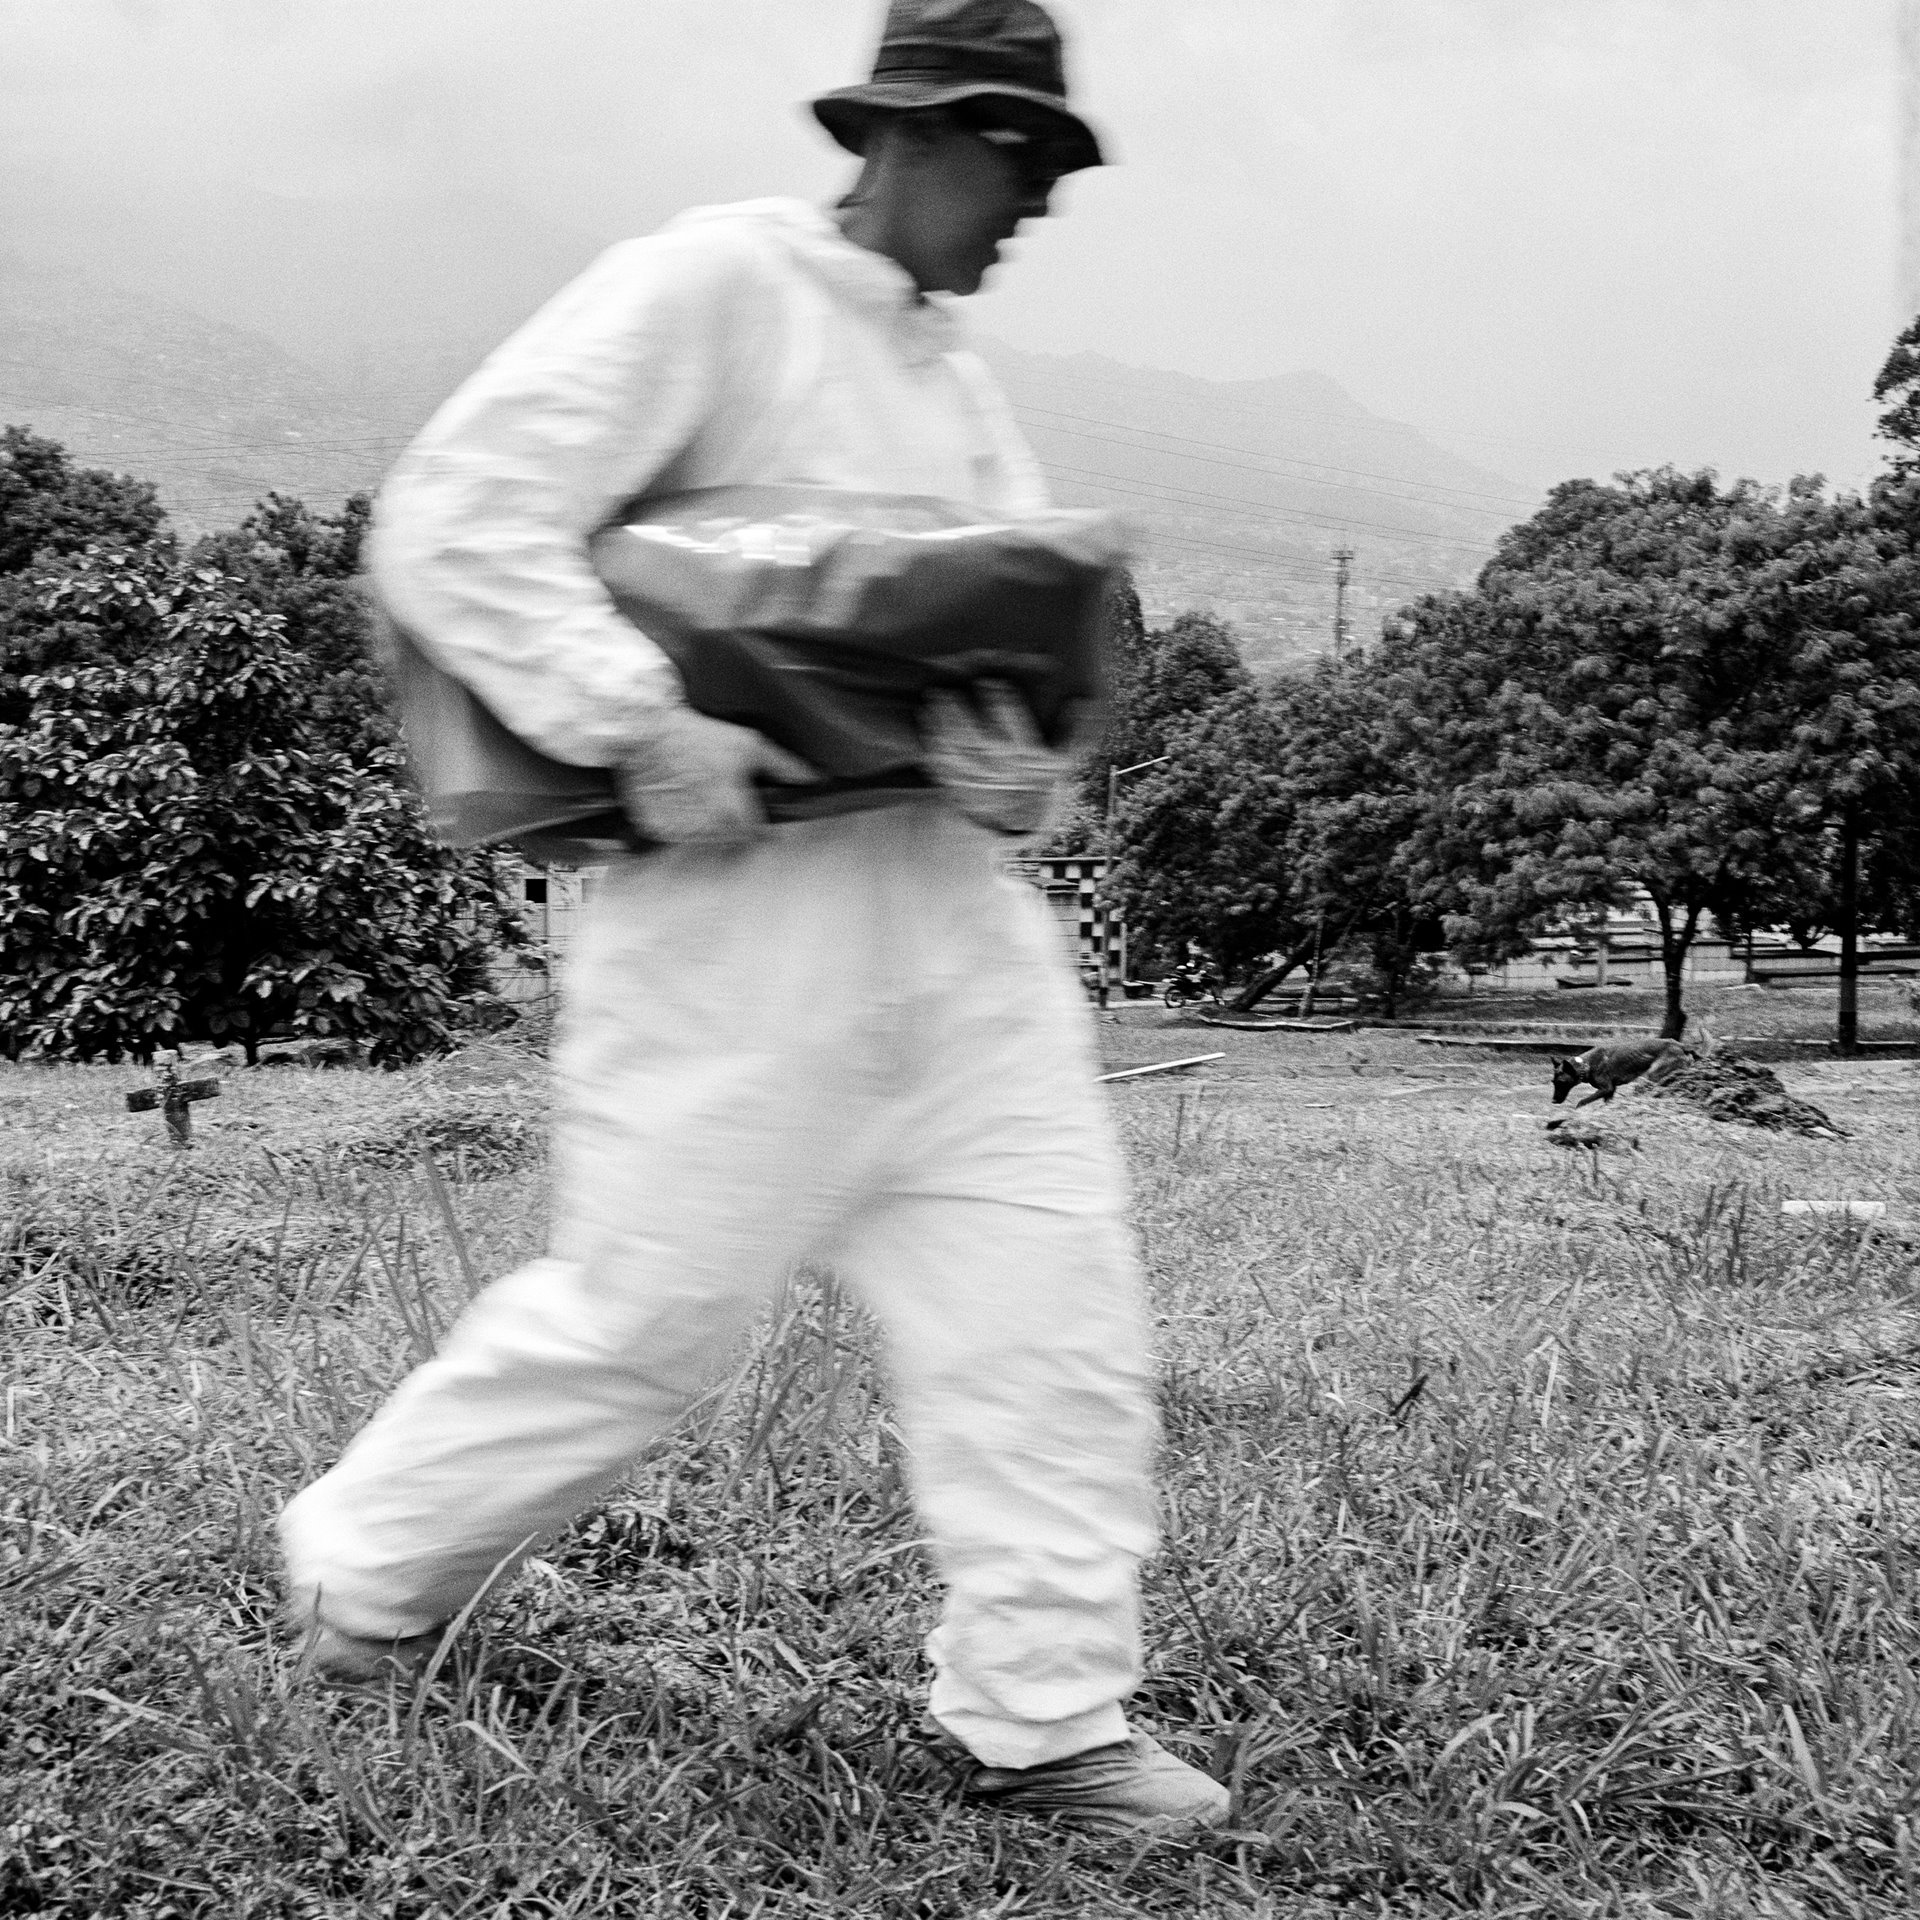 Forensic anthropologist John Fredy Ramirez Santana carries the remains of an unidentified body exhumed in the Jardín Cementerio Universal cemetery in Medellín, during a search for victims of Operación Orion &ndash; an action by security forces against Medellín urban guerillas in 2002. Human rights and civil society organizations claim it to have been a joint operation between State forces and paramilitaries, or at least that there was cooperation with paramilitaries to some extent. The remains will be transported to a forensic laboratory in Medellín to be identified. The bodies of a number of people killed in the operation were buried, unregistered, in mass graves in the cemetery. After two weeks of excavations, a team of forensics found two of the nine bodies they were looking for.